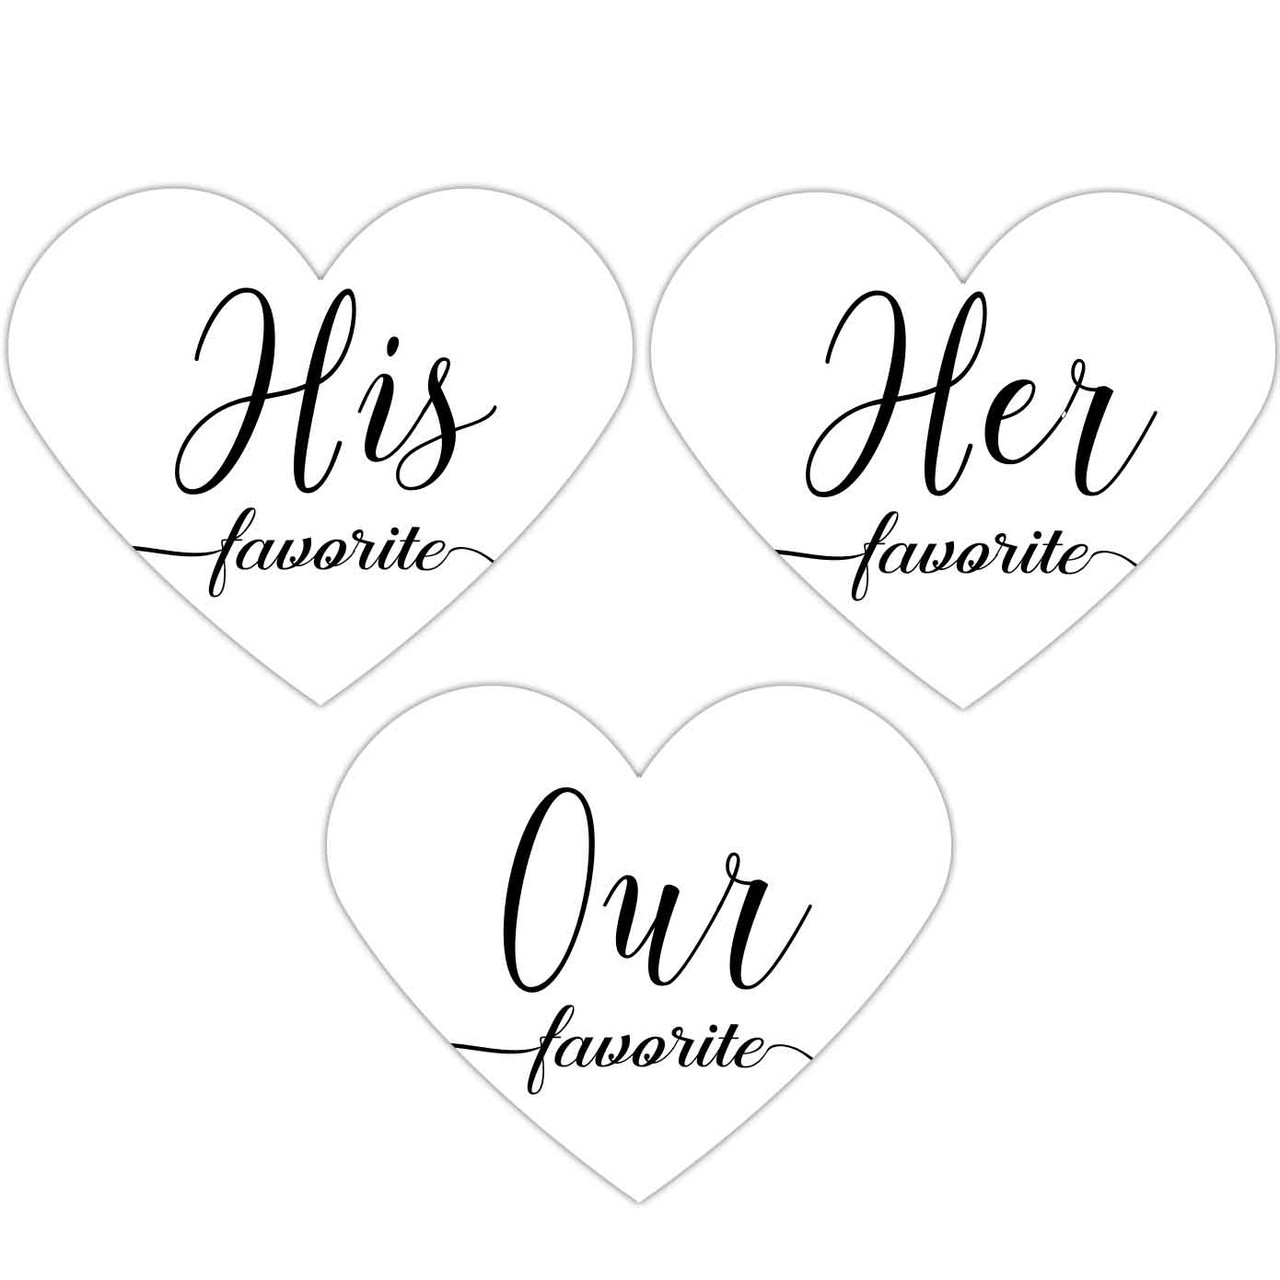 Wedding Decor Sticker Labels Floral Heart Shape Stickers Customize Text  Labels Personalized Valentine's Day Engagement Wedding